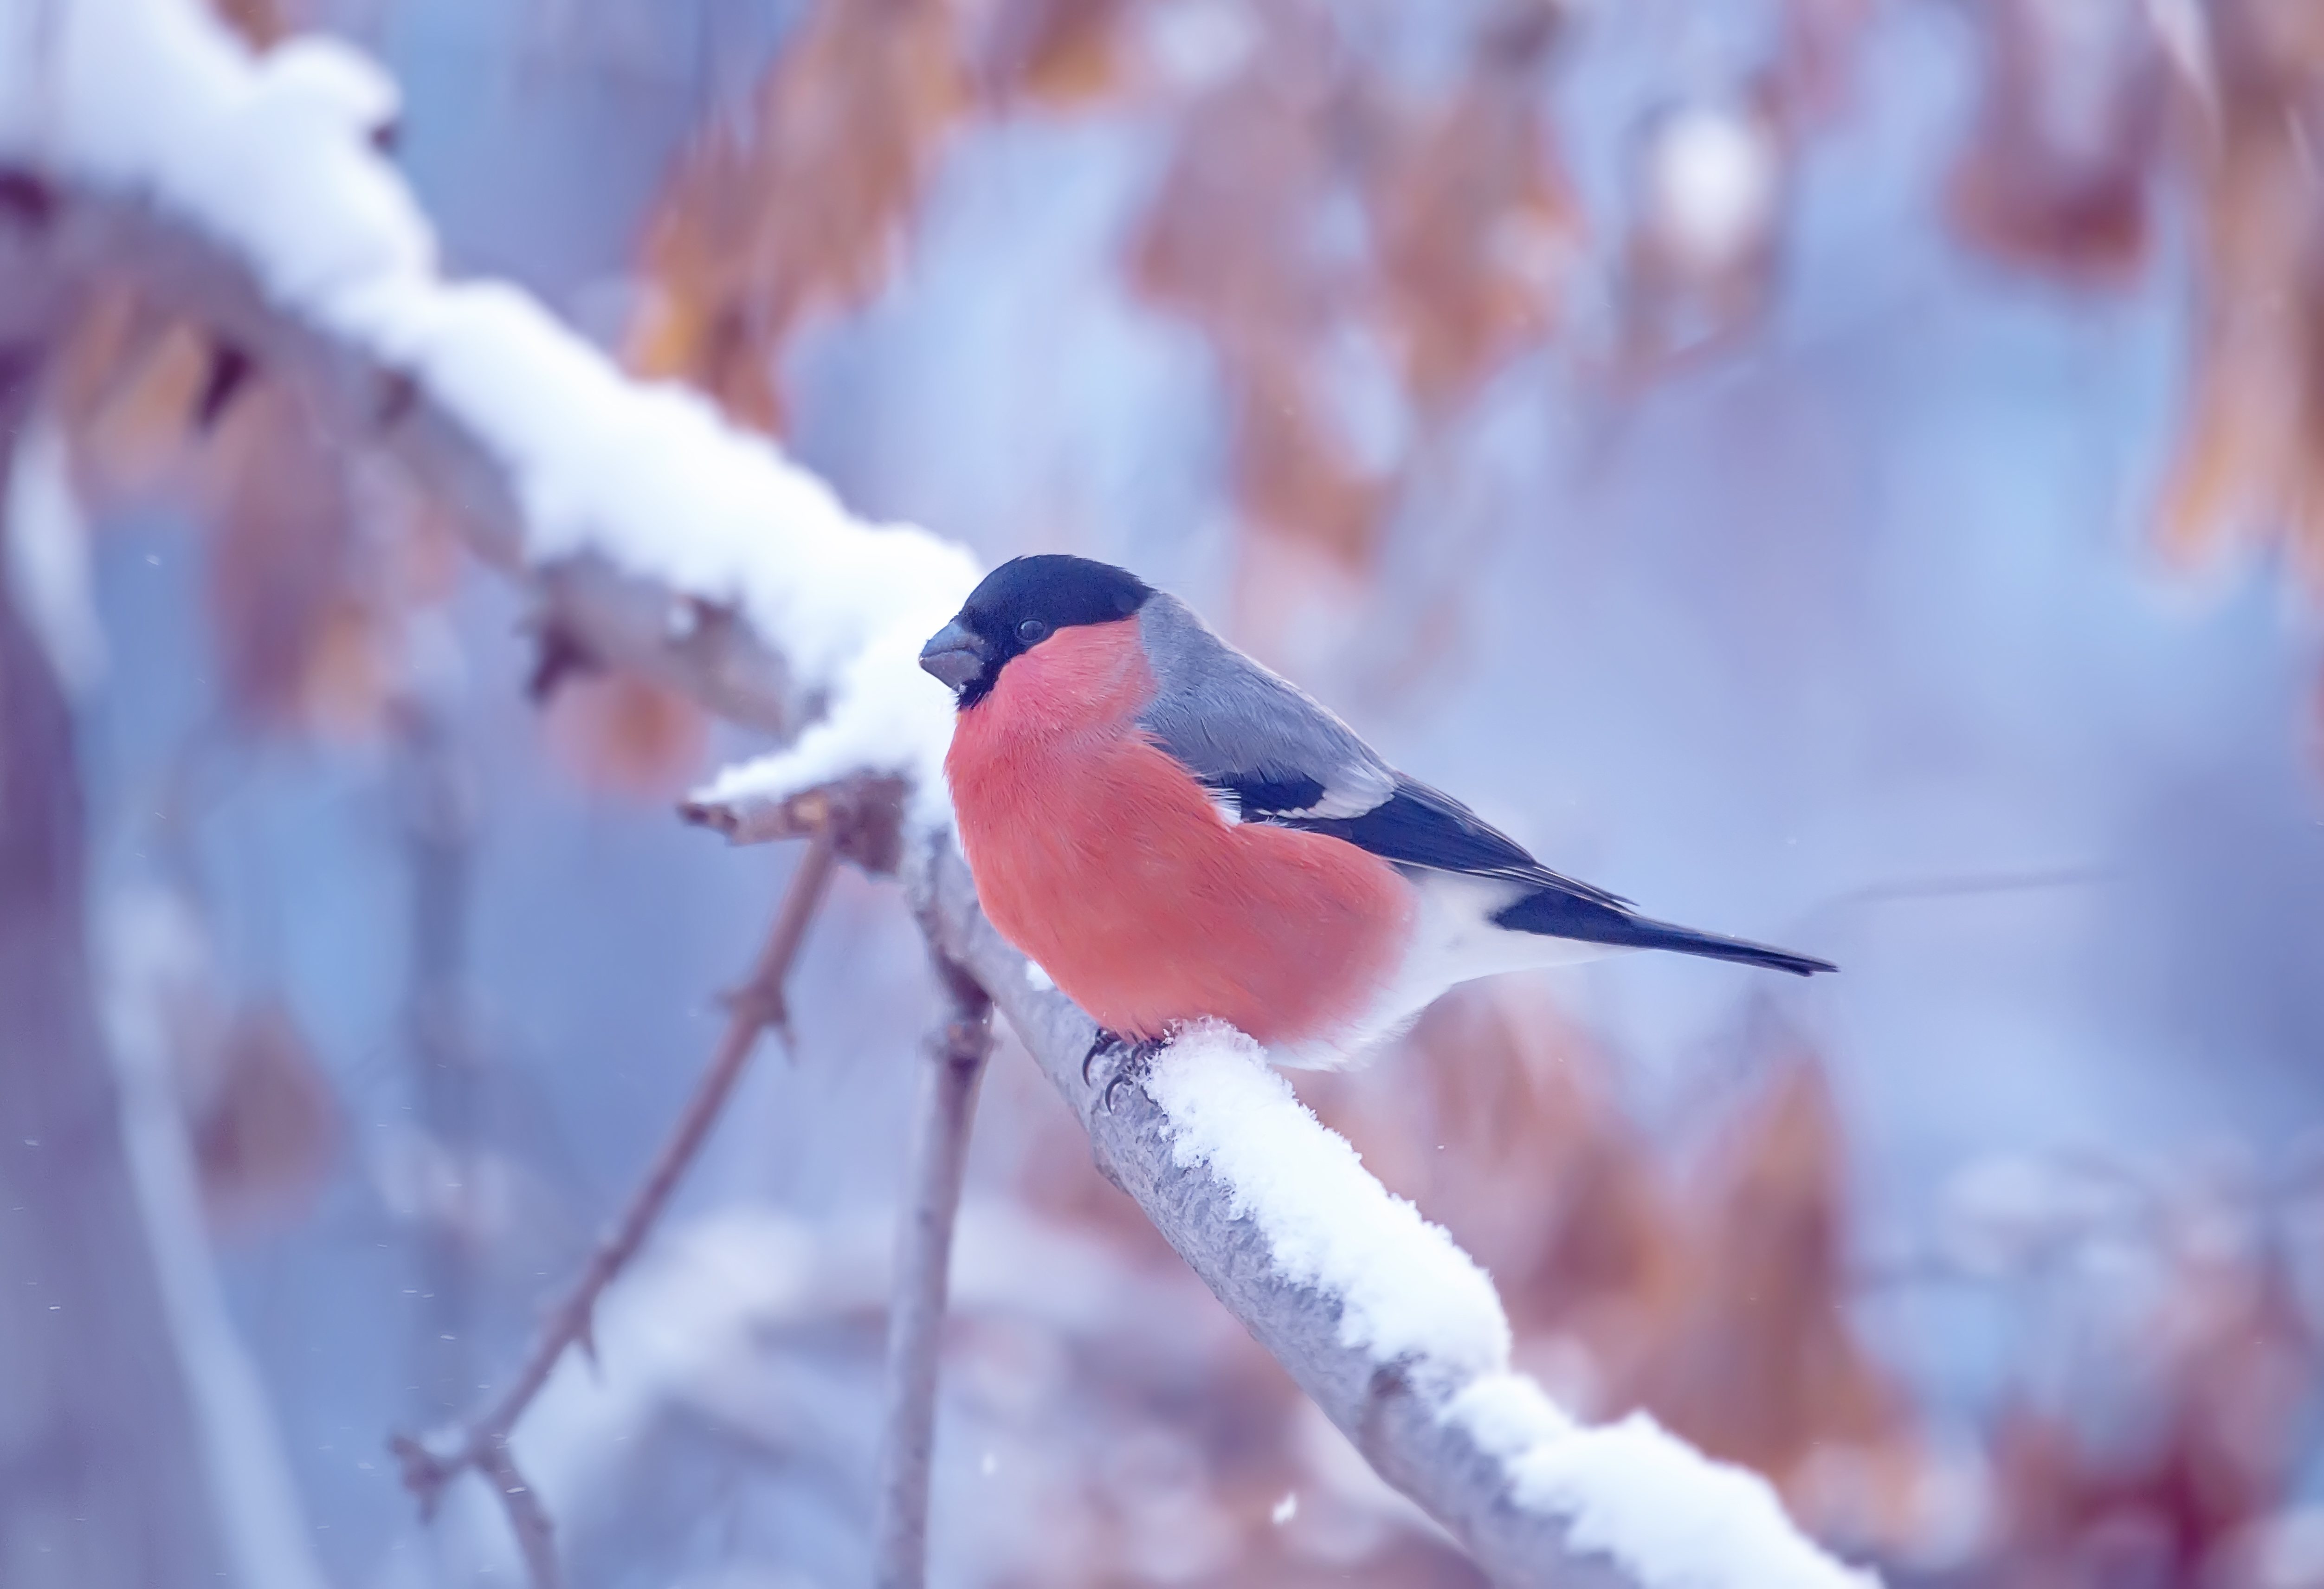 If you follow these tips, you will surely ensure that your bird does not catch a cold.